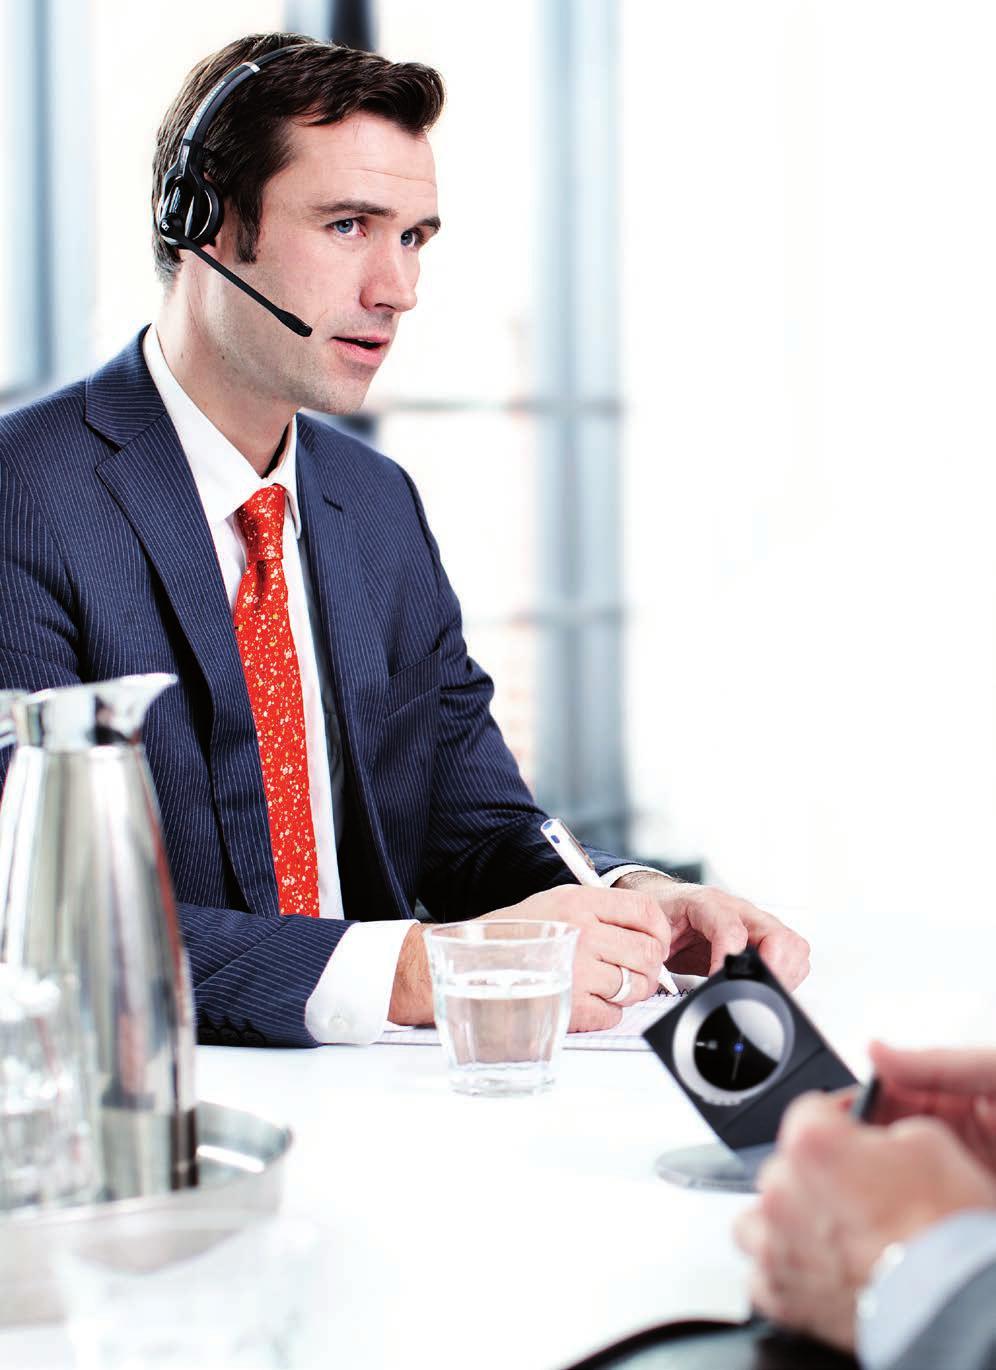 Excelling your Unified Communications Experience With Sennheiser s range of headsets, the combination of exceptional HD sound, quality design and build and a focus on real life usability - give